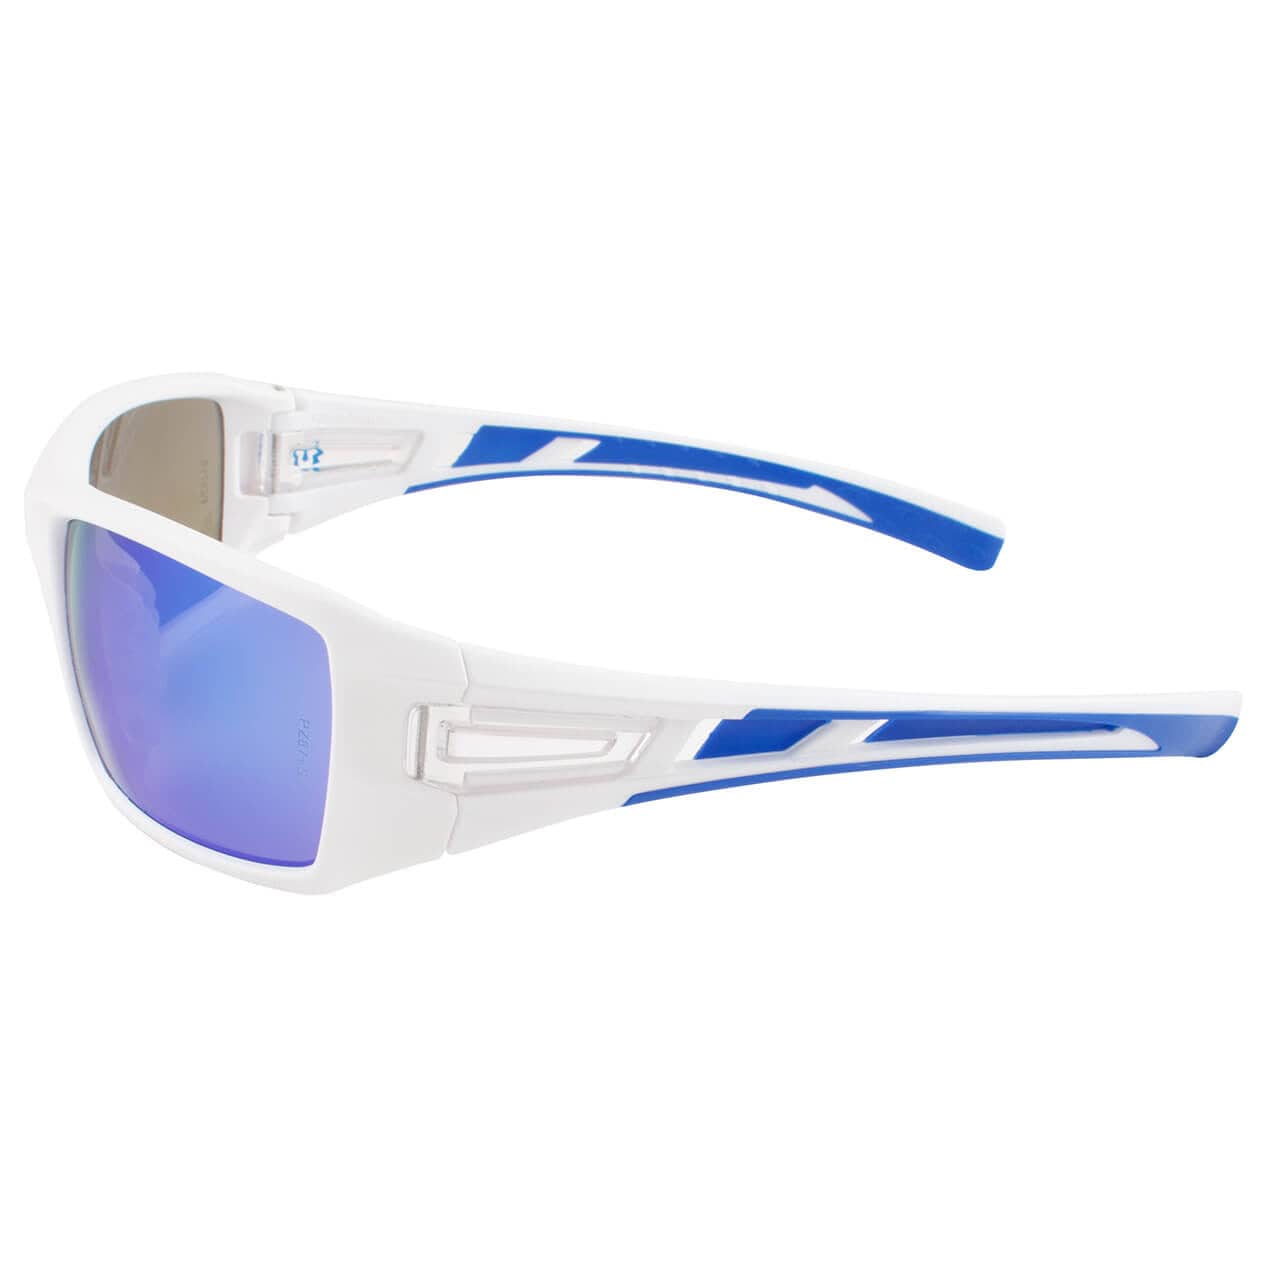 Metel M30 Safety Sunglasses Lightweight Full-Frame, Flexible Temples, Multiple Color Options